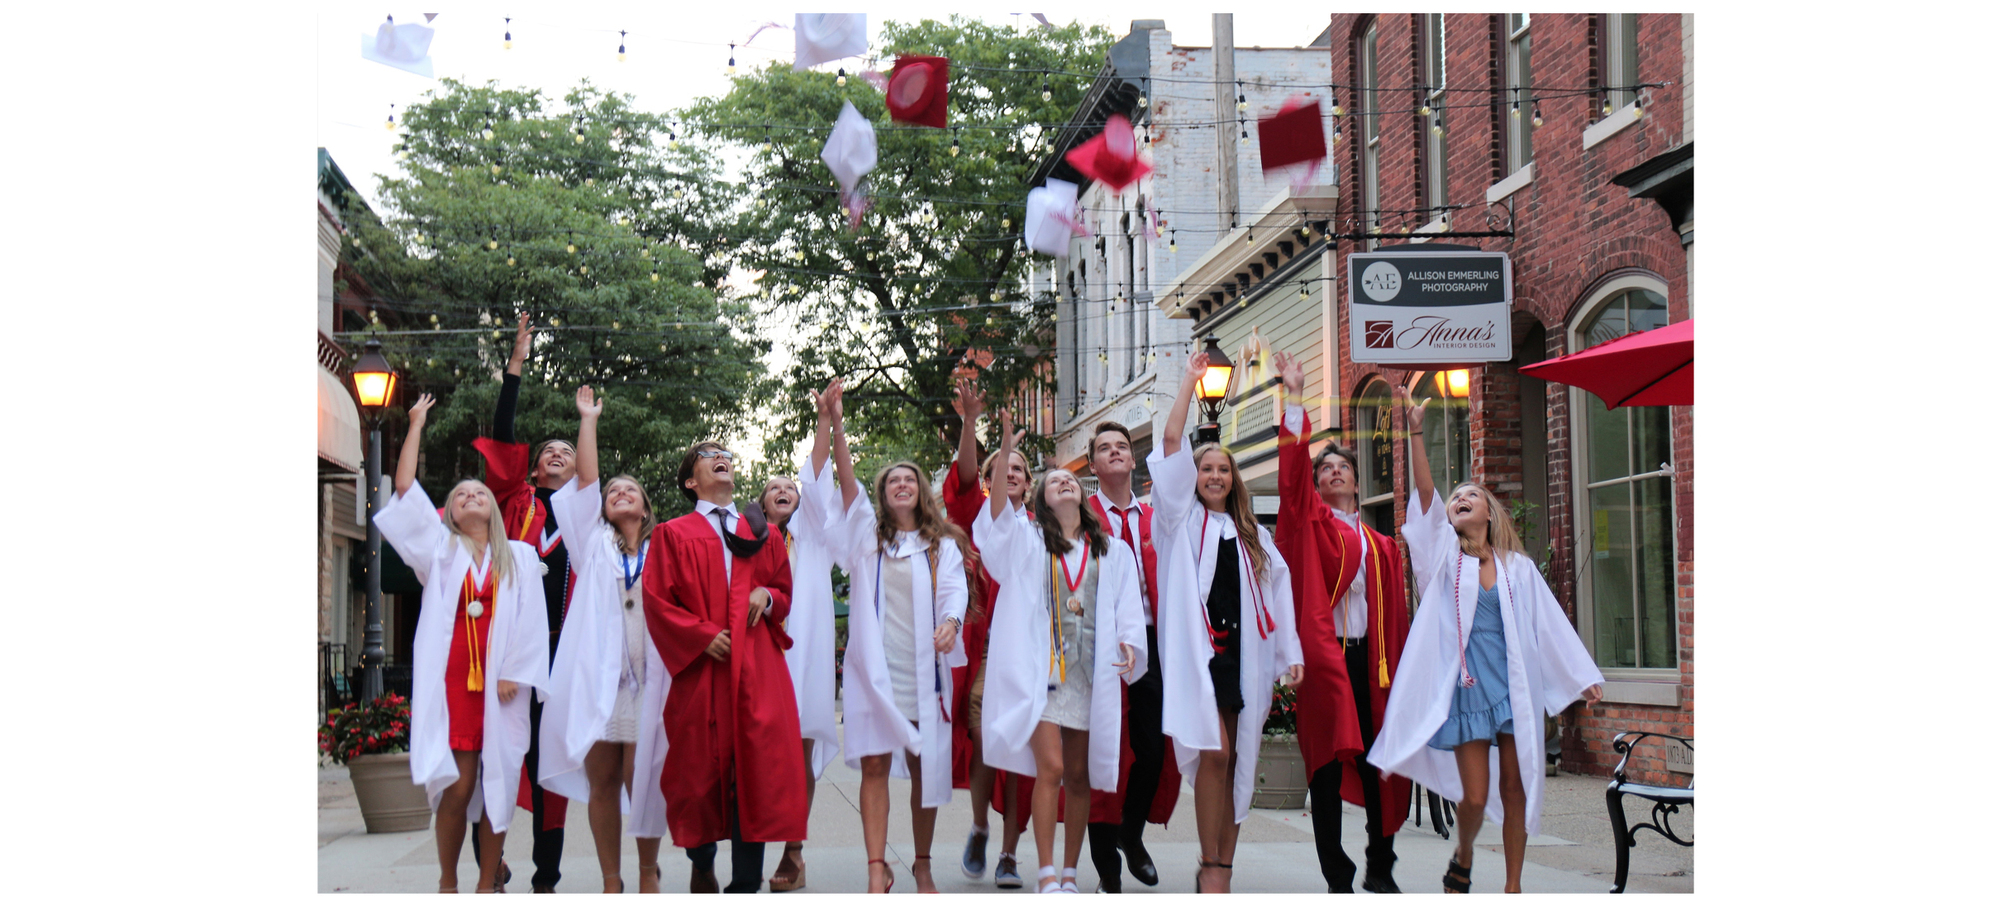 A group of students in their graduation gowns throwing their caps in the air